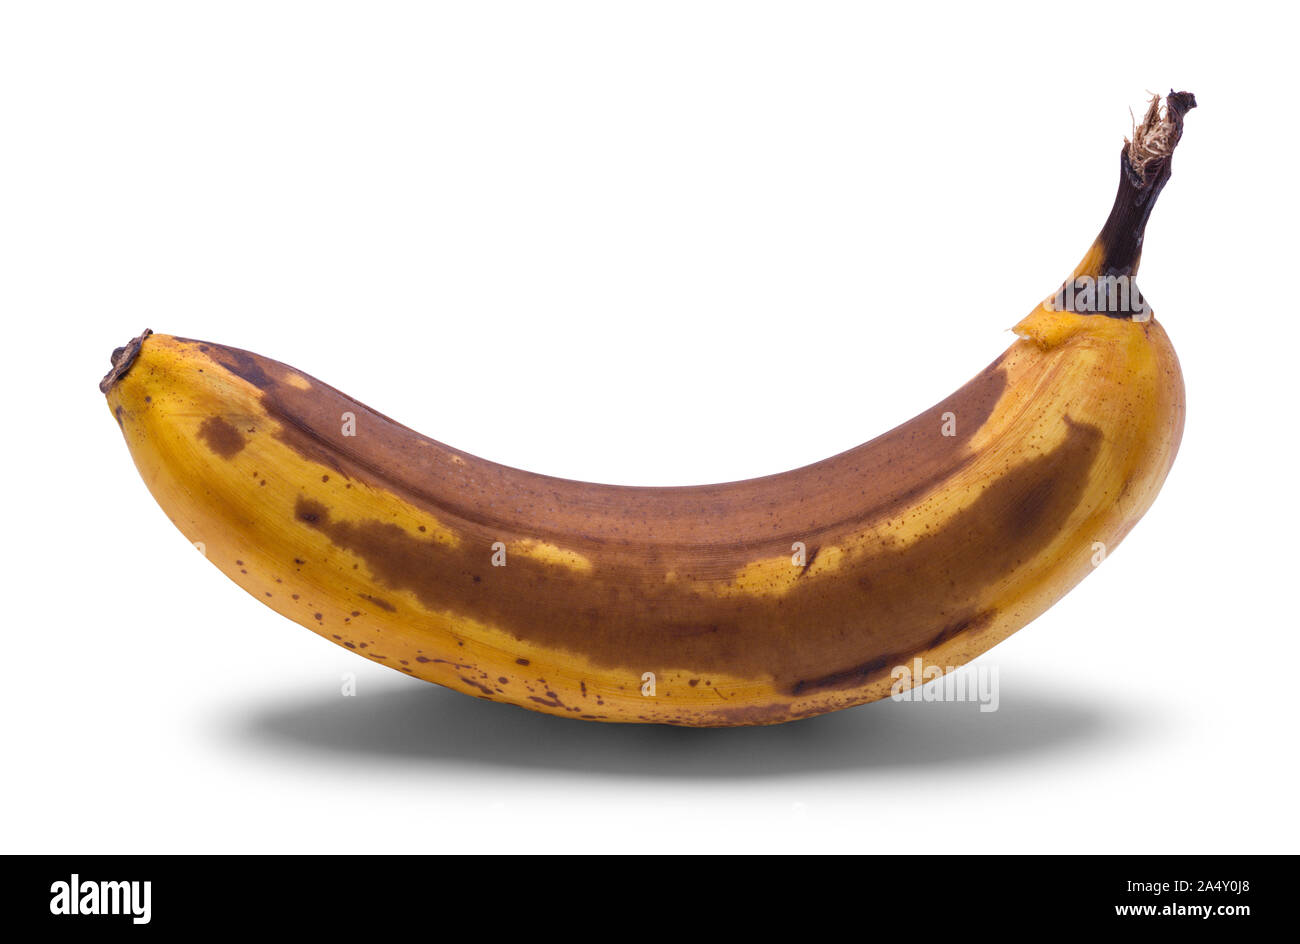 Old Brown Banana Side View Isolated on White Background. Stock Photo